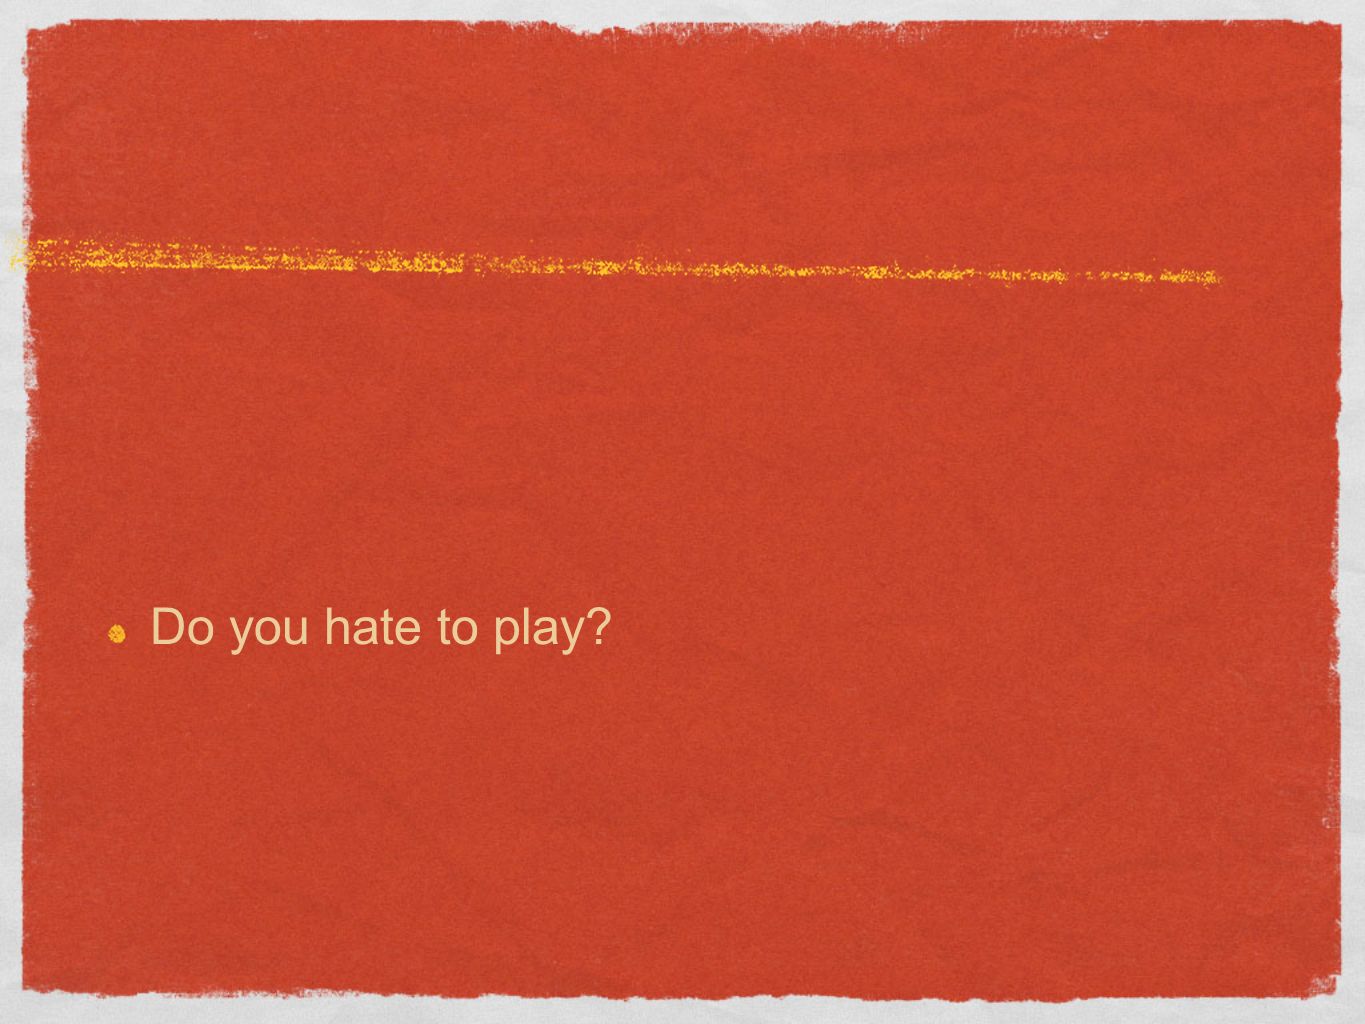 Do you hate to play